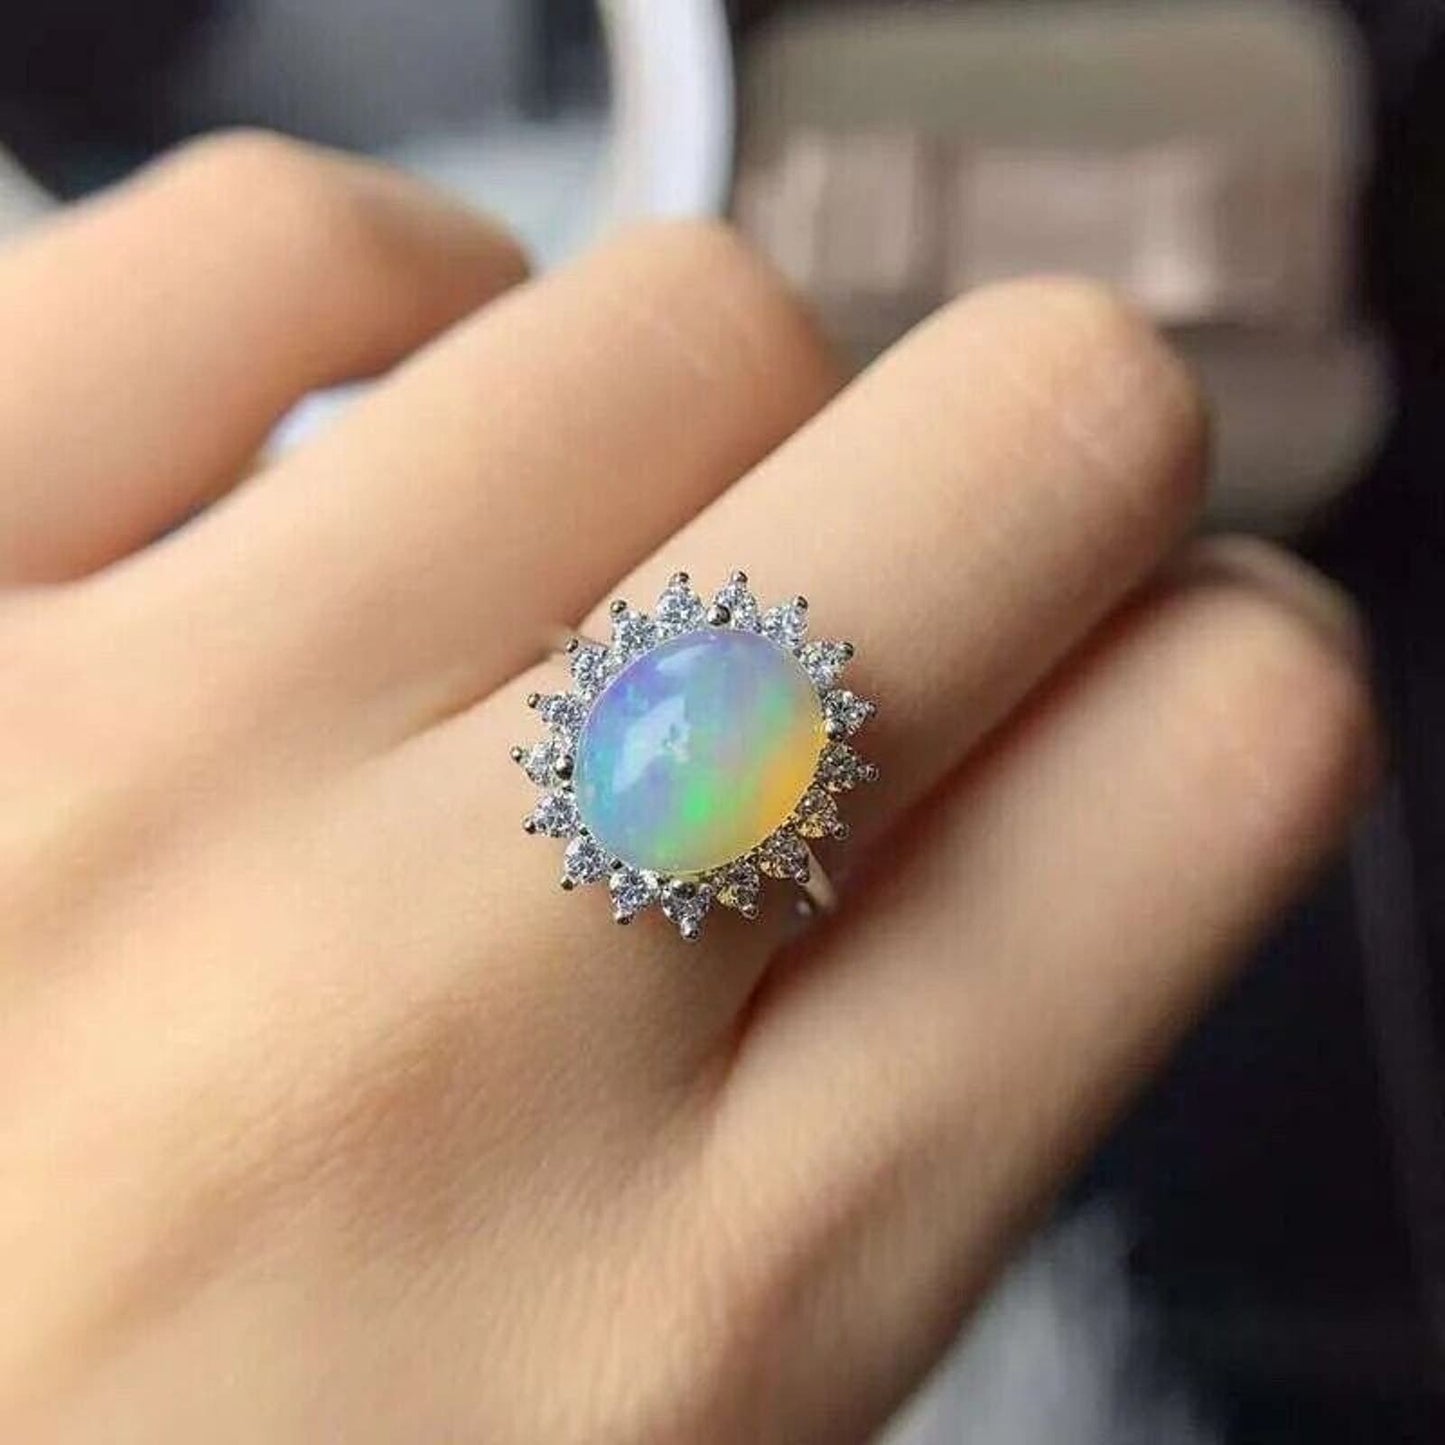 Fire Opal Statement Ring 8x10mm Sterling Silver